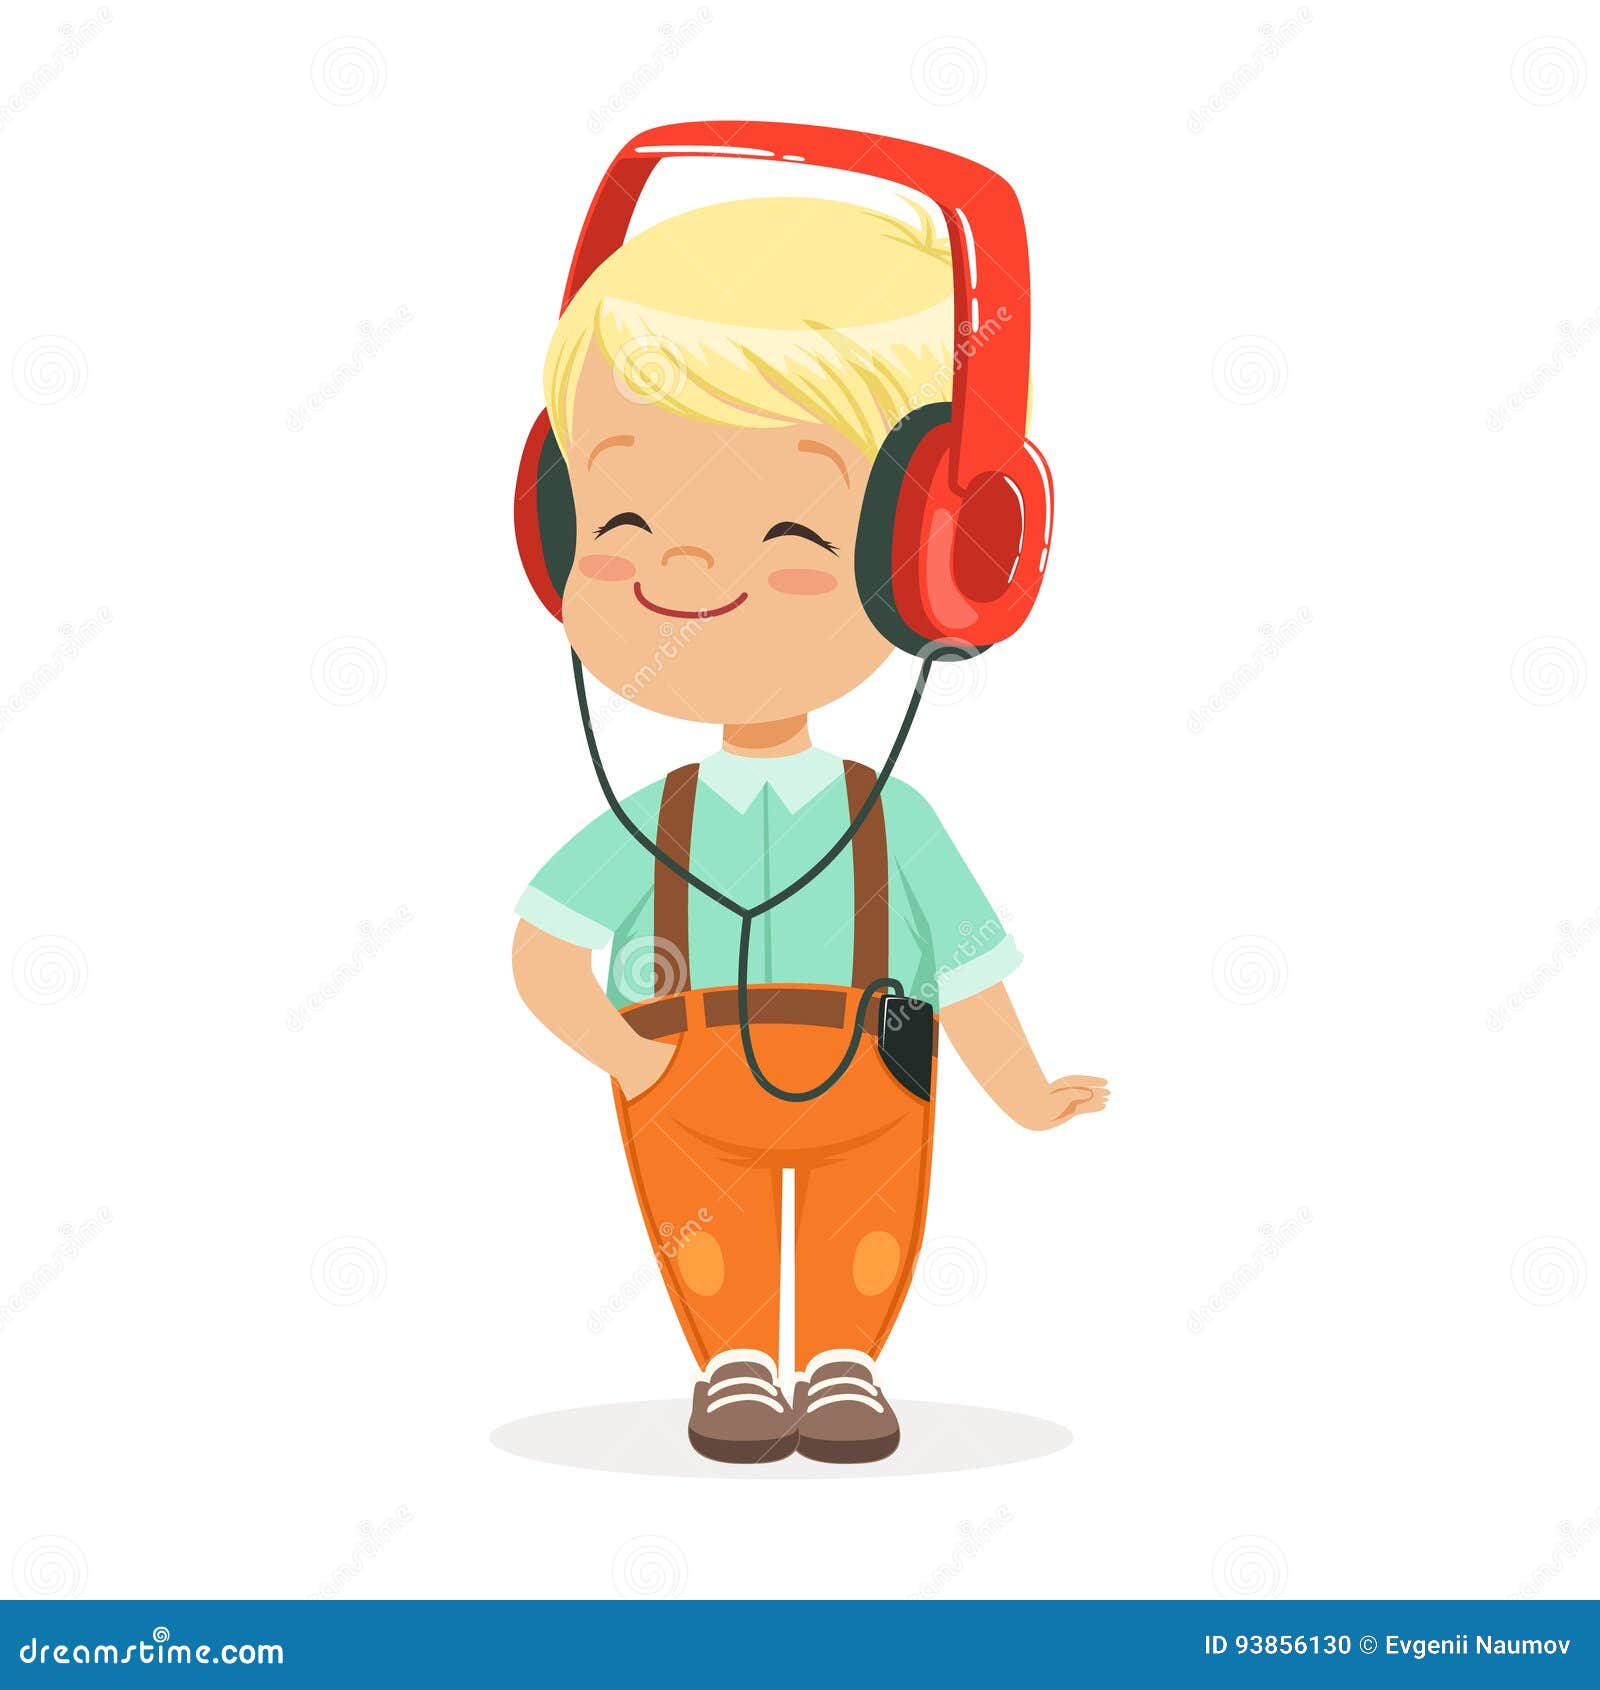 Smiling Little Boy Listening To Music in Headphones, Colorful Cartoon  Character Vector Illustration Stock Vector - Illustration of music,  cheerful: 93856130